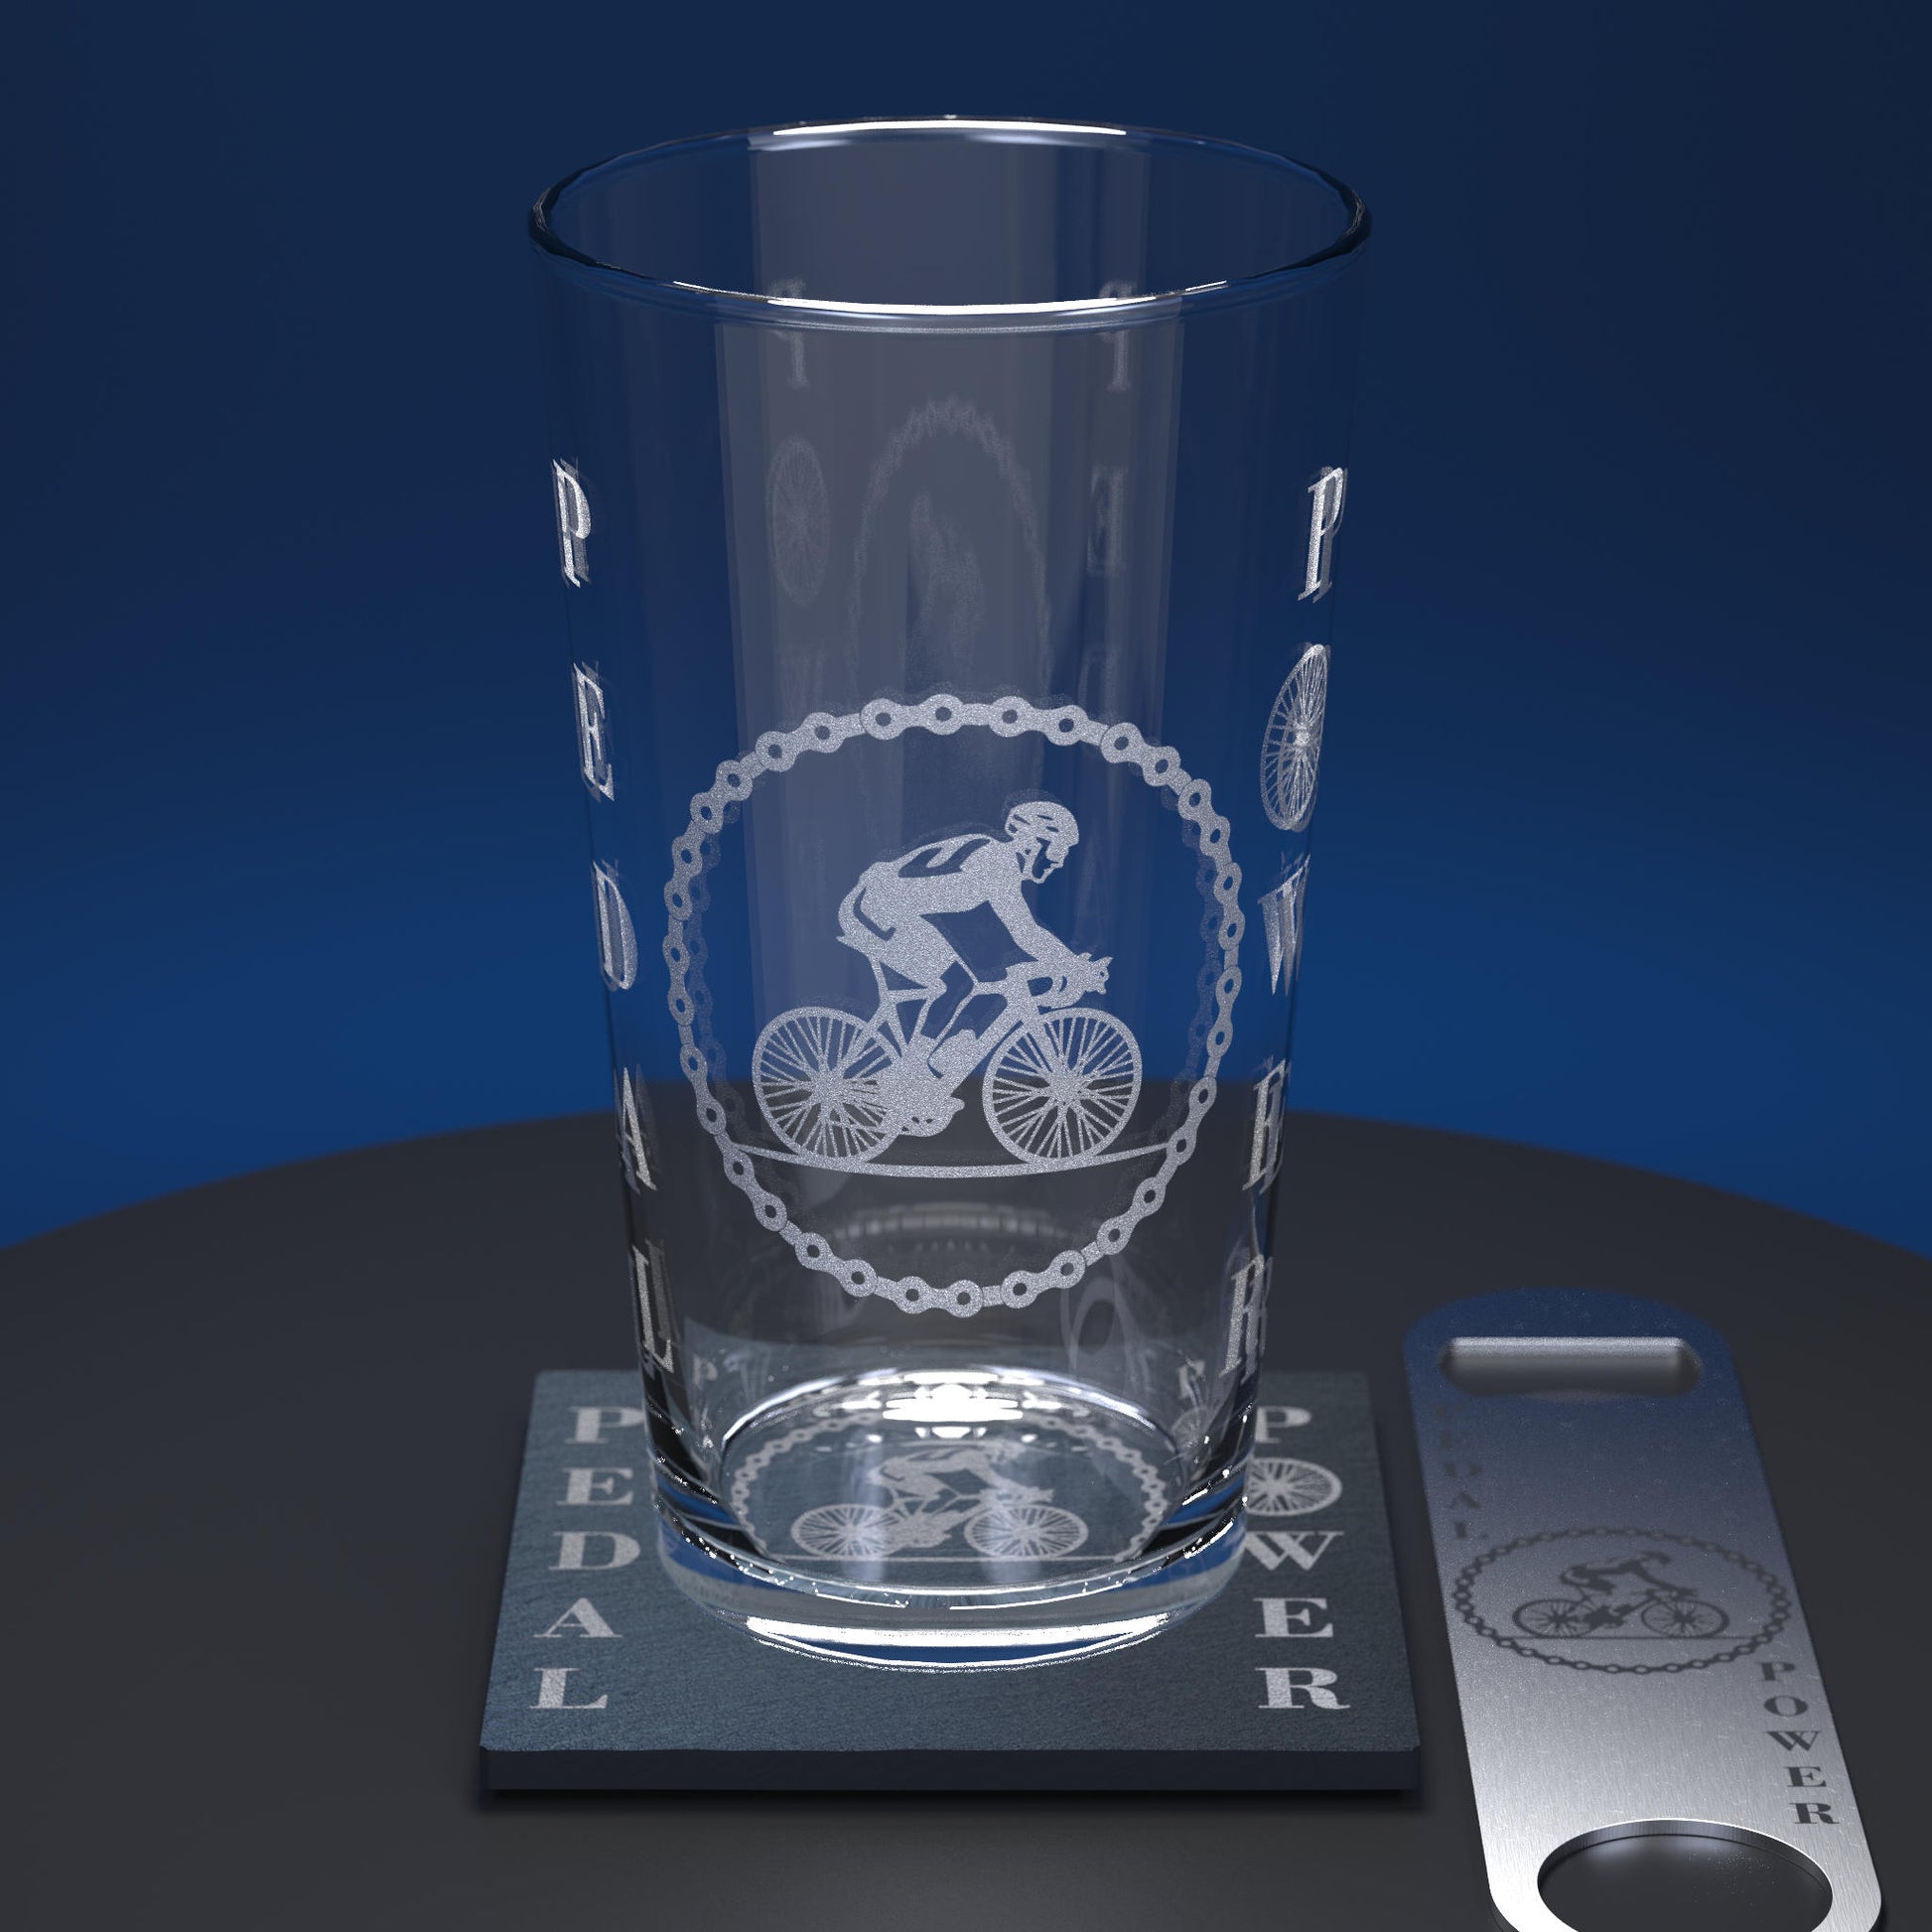 Pint glass set consisting of engraved glass with image of cyclist and Pedal Power text, includes matching slate coaster and stainless steel bottle opener